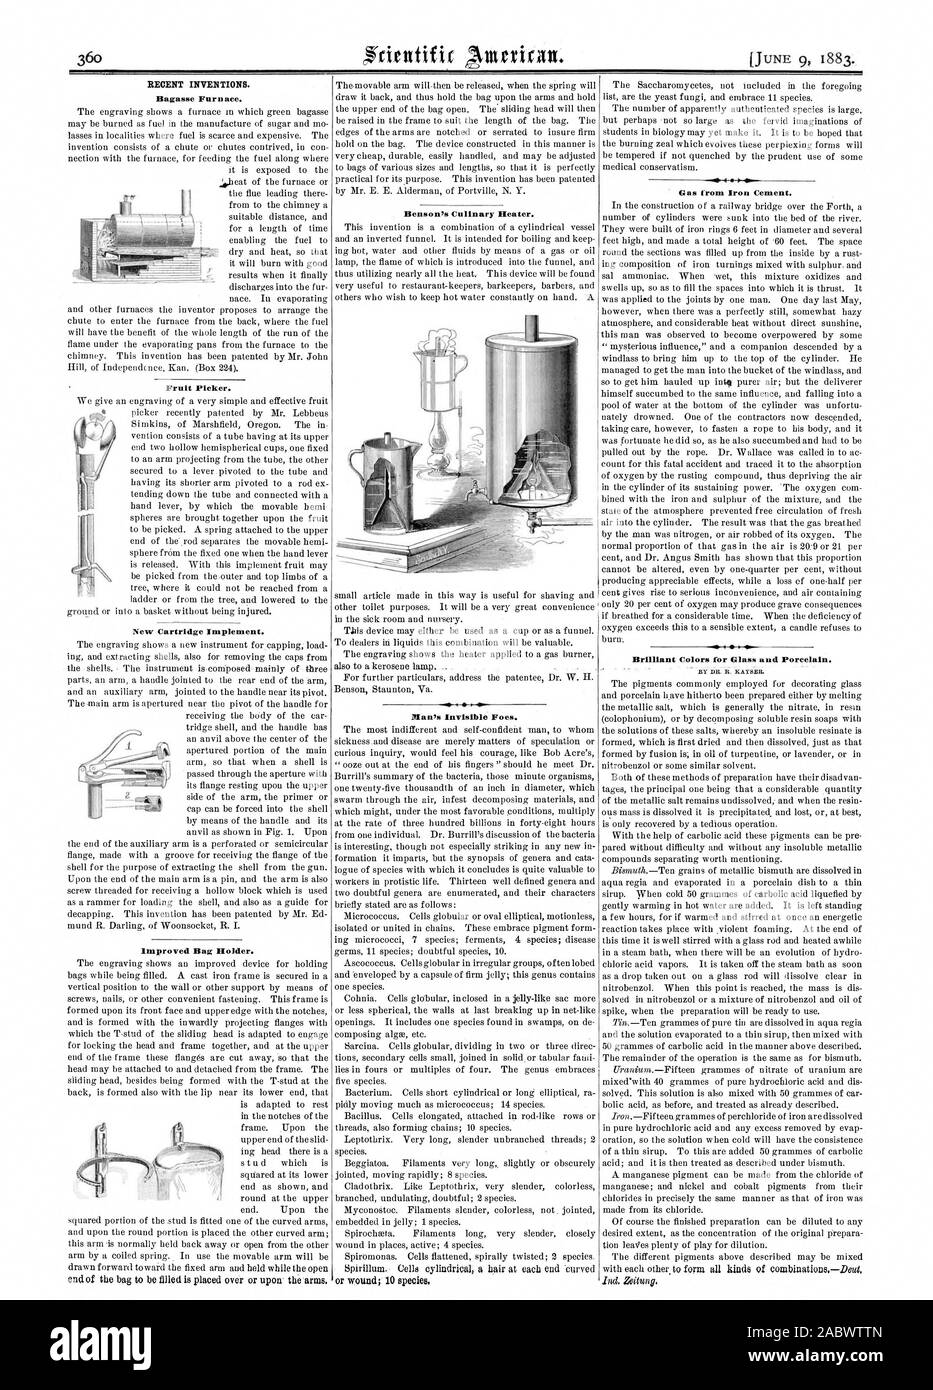 Bagasse Furnace. Fruit Picker. New Cartridge Implement. Improved Bag Holder. Benson's Culinary Heater. Man's Invisible Foes. Gas from Iron Cement. All i Brilliant Colors for Glass and Porcelain., scientific american, 1883-06-09 Stock Photo